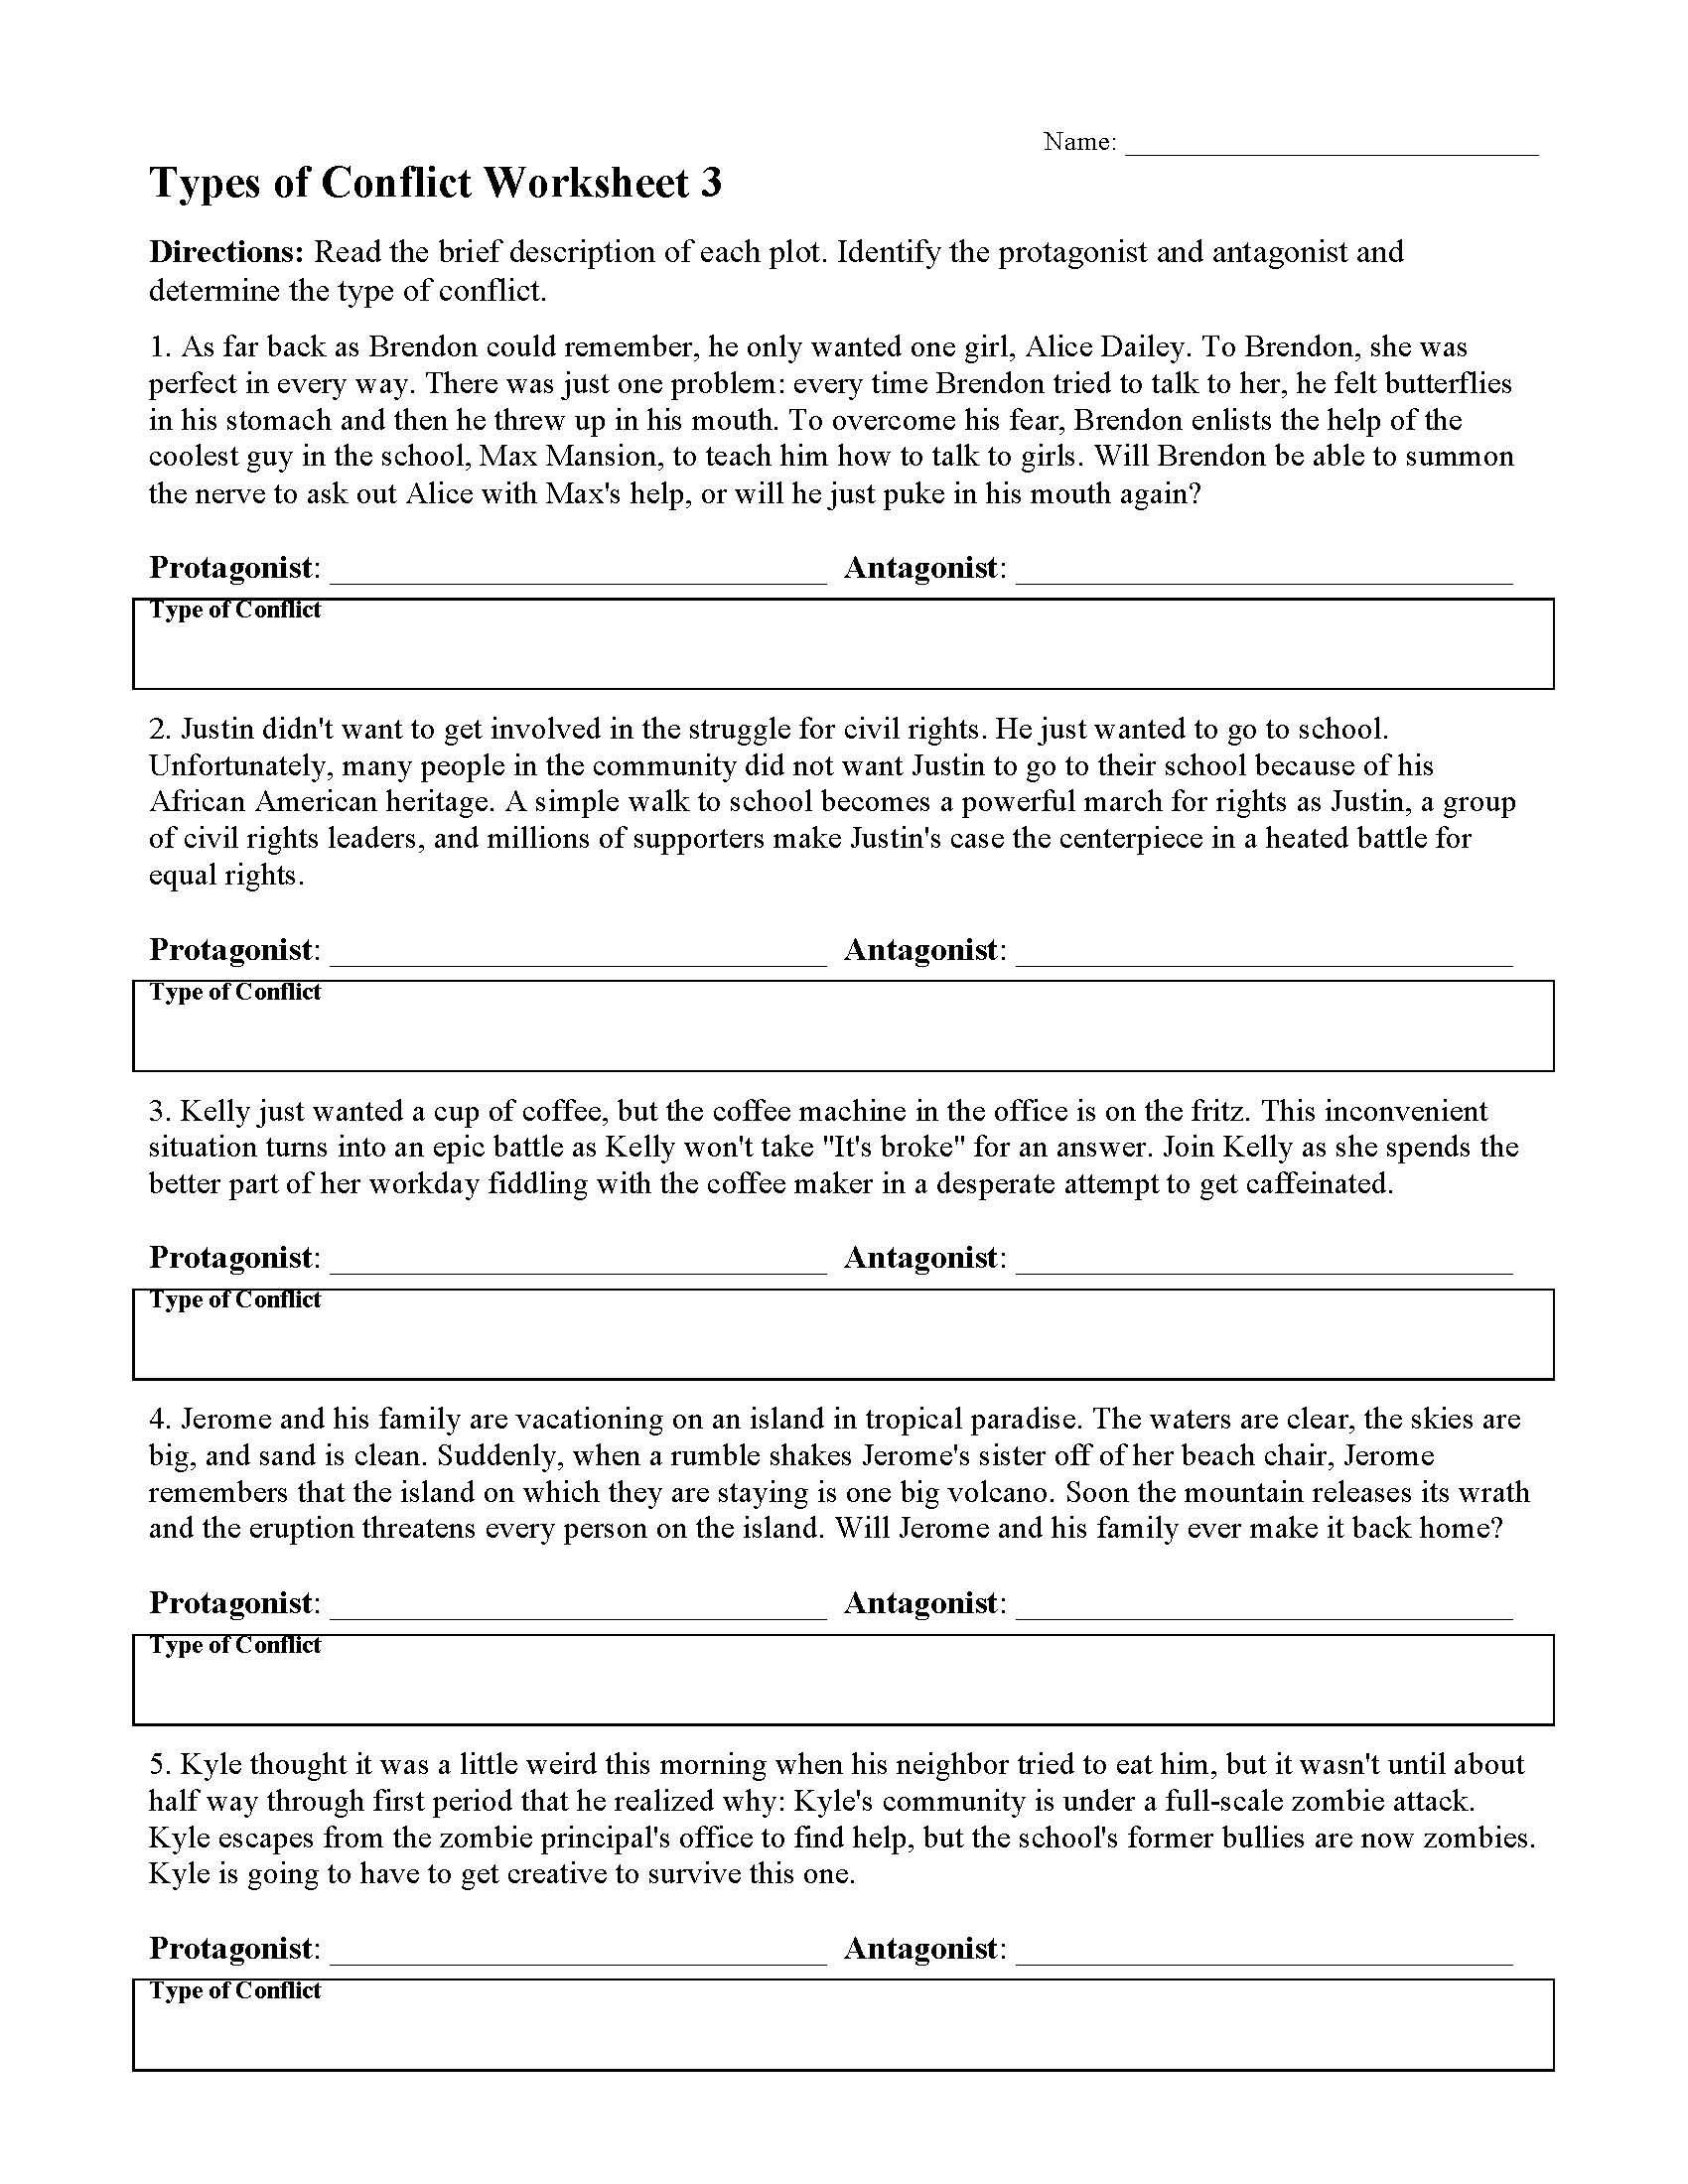 types of conflict worksheet 03 01